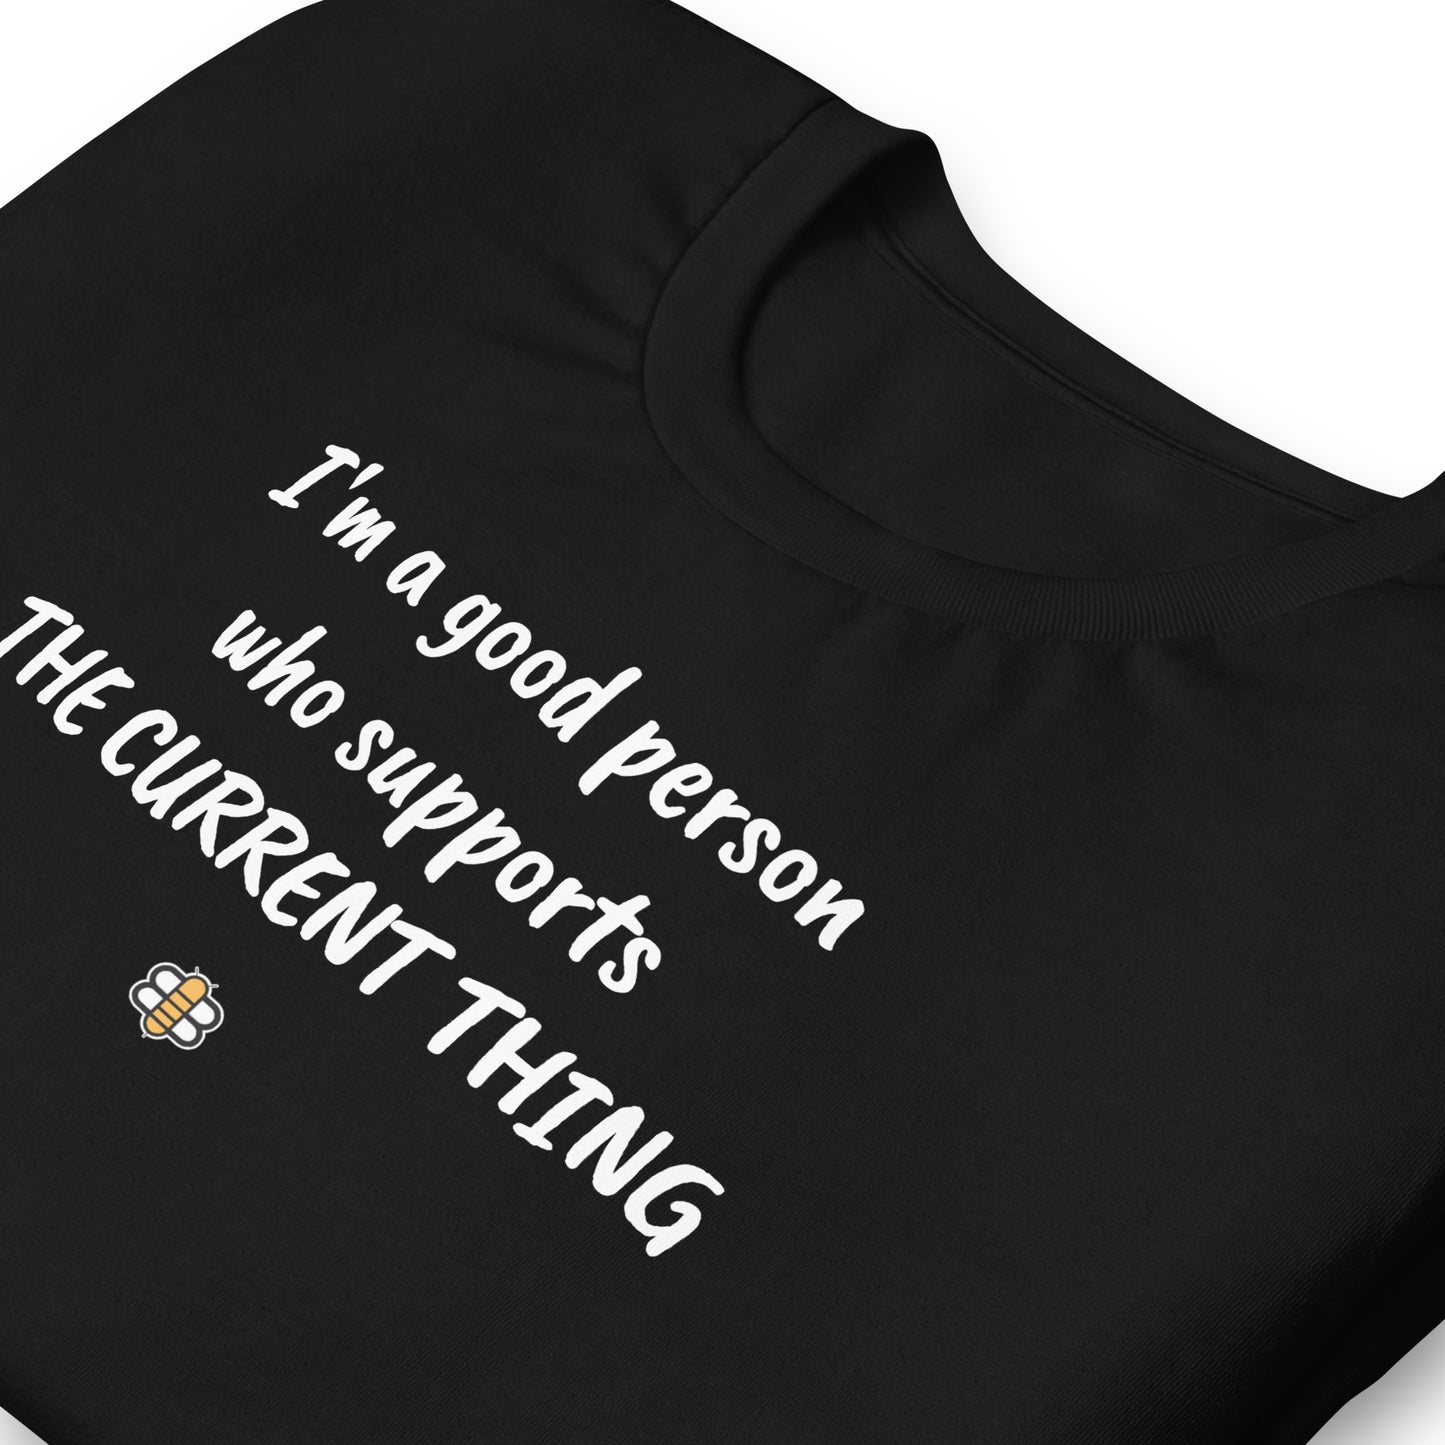 Support the Current Thing T-Shirt